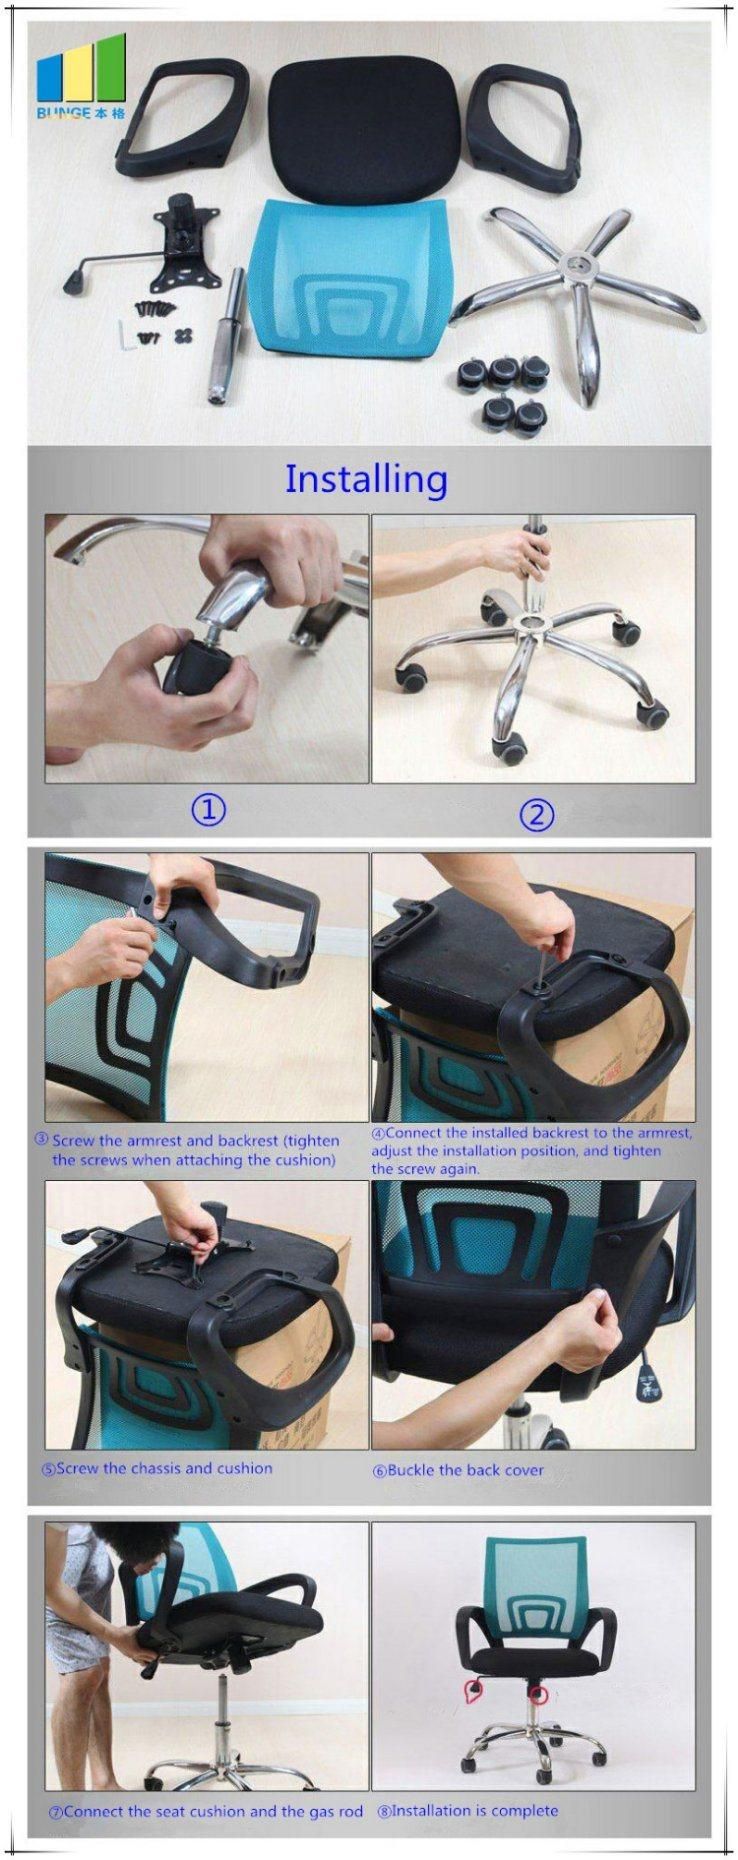 Adjustable Executaive Ergonomic Fabric Chair Comfortable Office Chairs